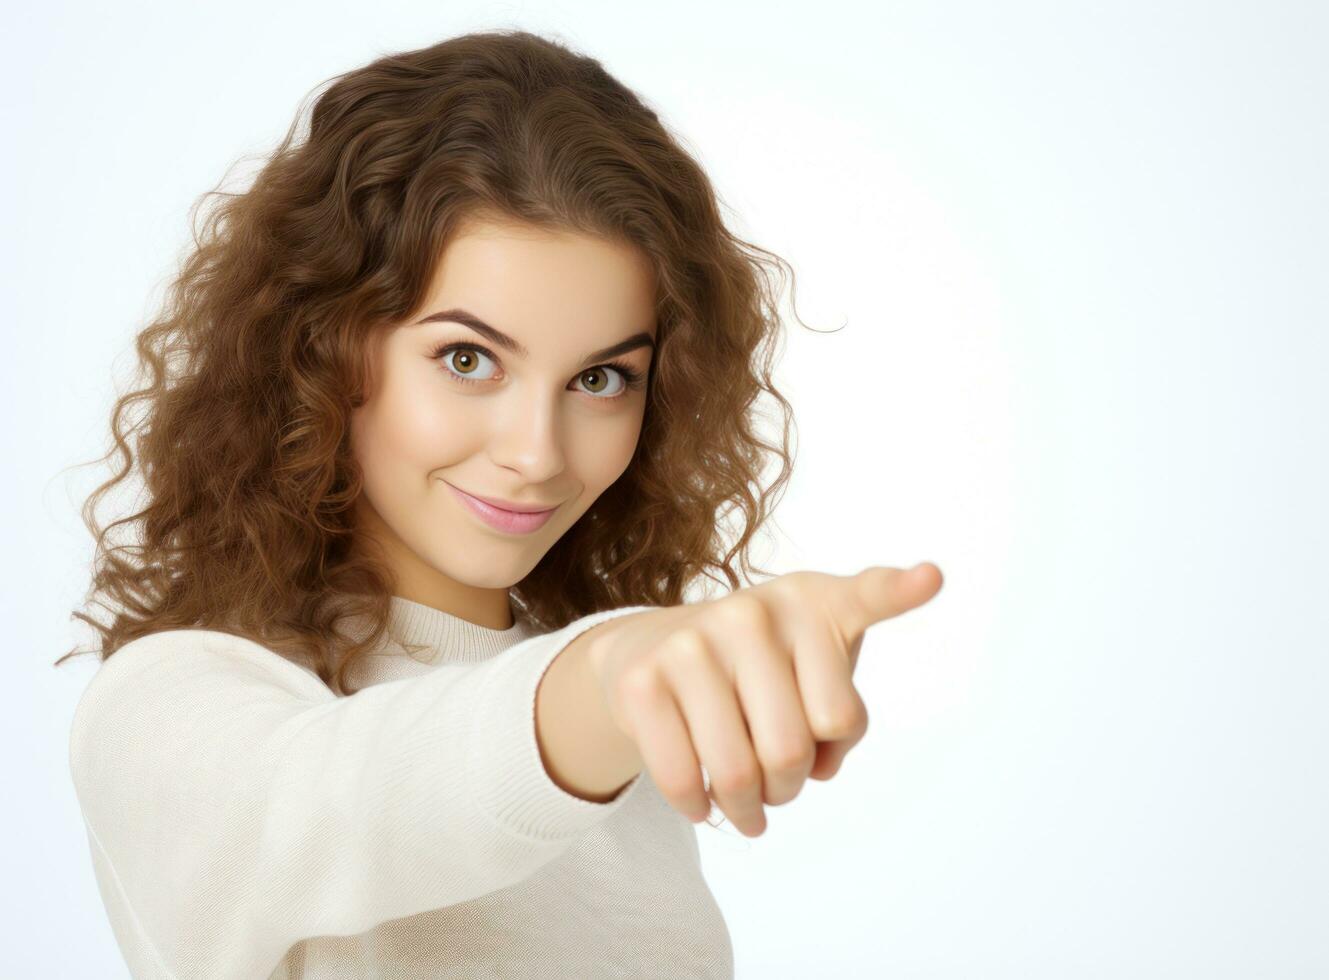 Young girl looking at camera while pointing her finger photo